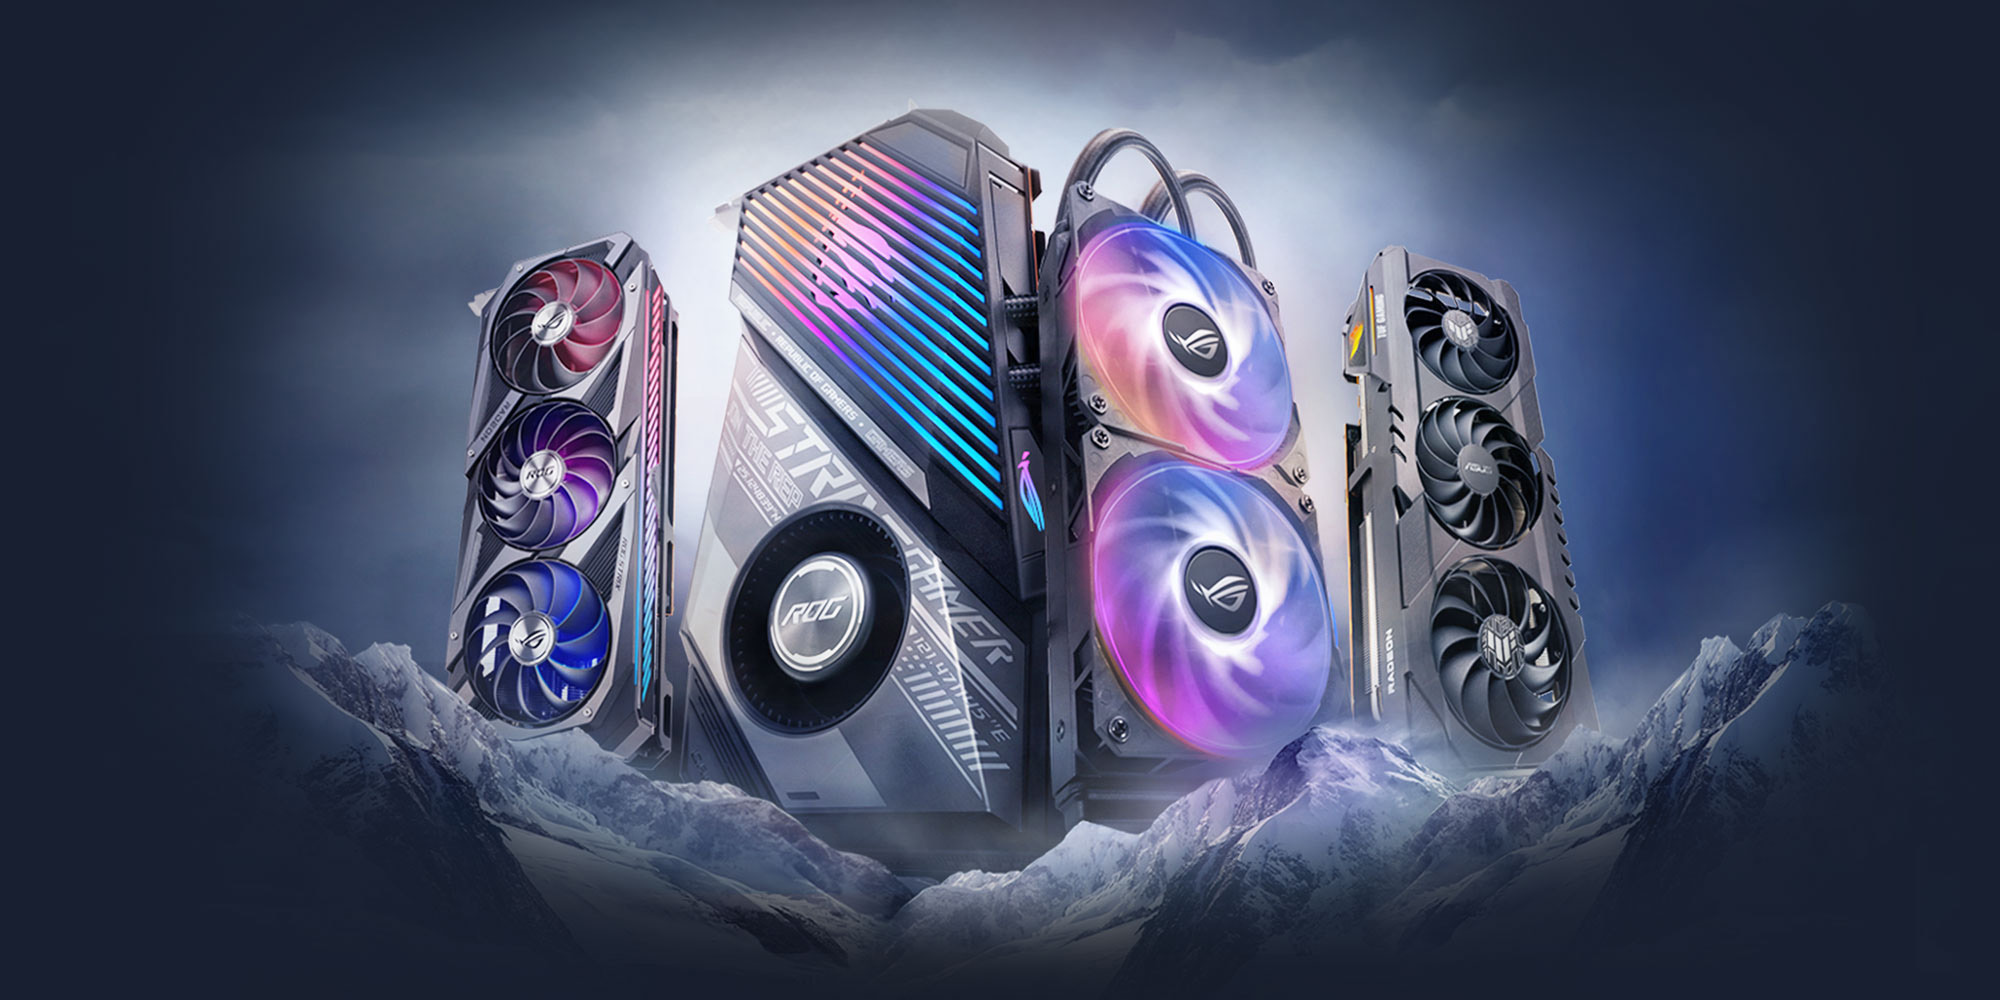 An image showing three ASUS graphics cards atop snowy mountain, with RGB lighting illuminated.